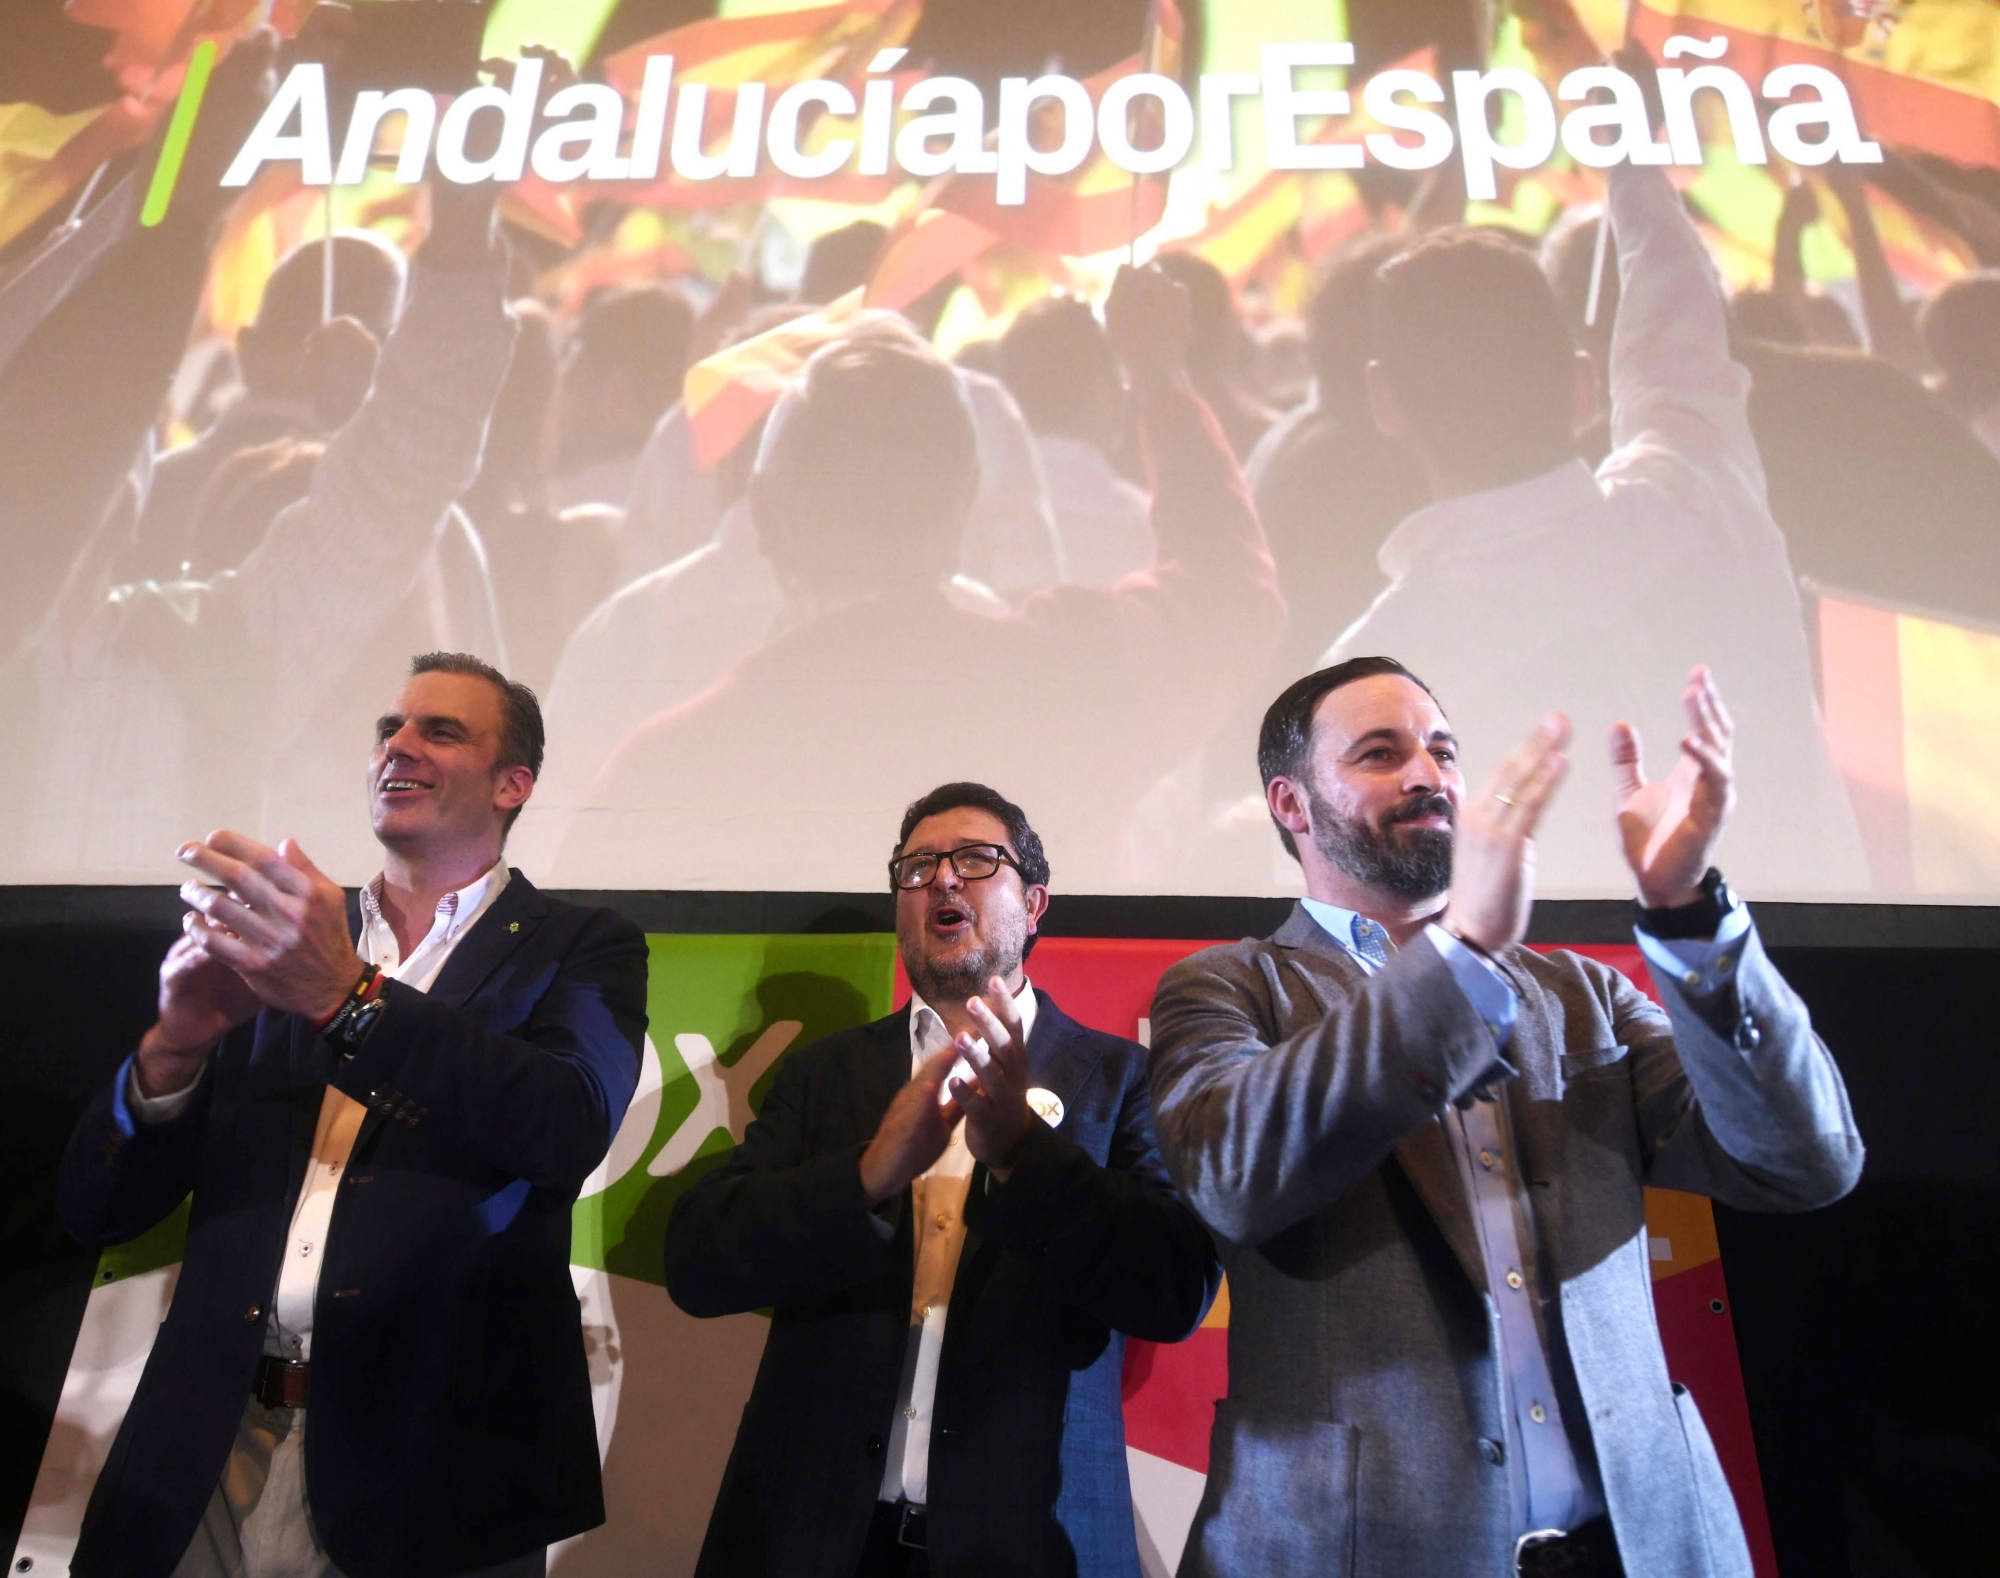 epa07205021 General Secretary of right-wing party Vox, Javier Ortega (L), Andalusia presidential candidate Francisco Serrano (C) and Vox's President Santiago Abascal (R) wave supporters after the Andalusian regional election, in Sevilla, Spain, 02 December 2018. SpainÄôs far-right Vox party won 12 seats.  EPA/Rafa Alcaide SPAIN ANDALUSIA ELECTION